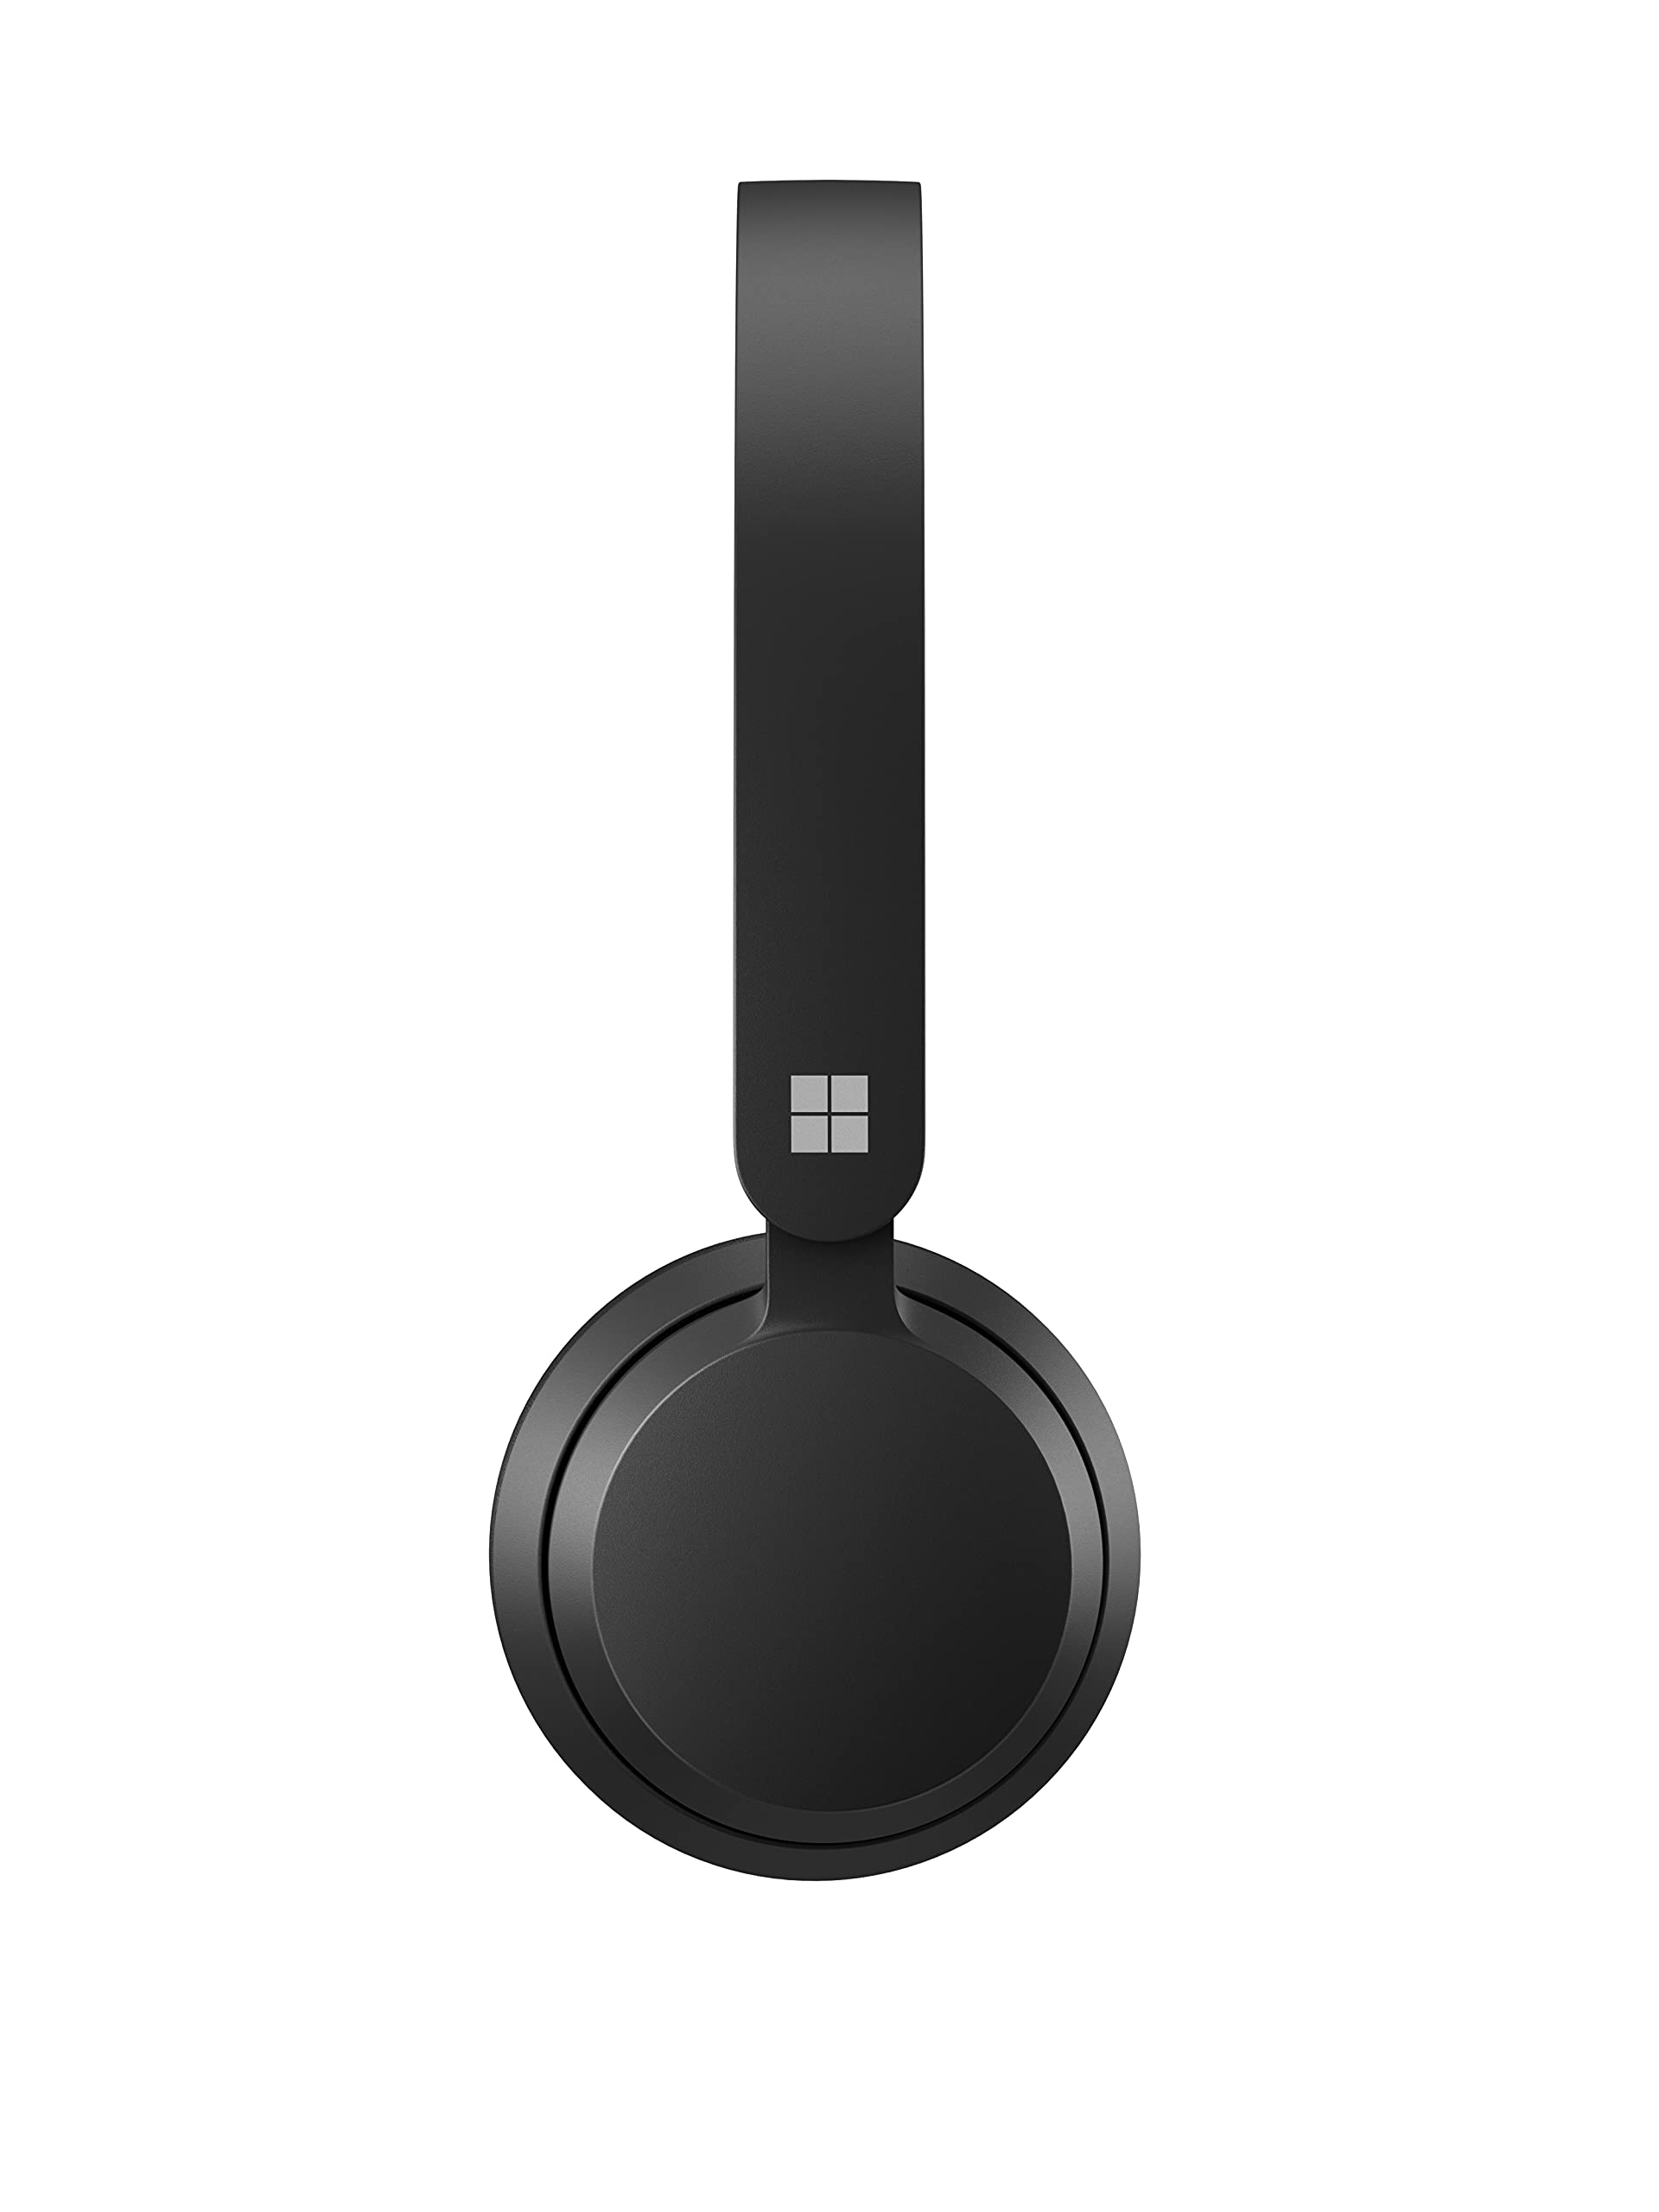 Microsoft Modern USB Headset - Wired Headset,On-Ear Stereo Headphones with Noise-Cancelling Microphone, USB-A Connectivity, In-Line Controls, PC/Mac/Laptop - Certified for Microsoft Teams (Open Box, Like New)